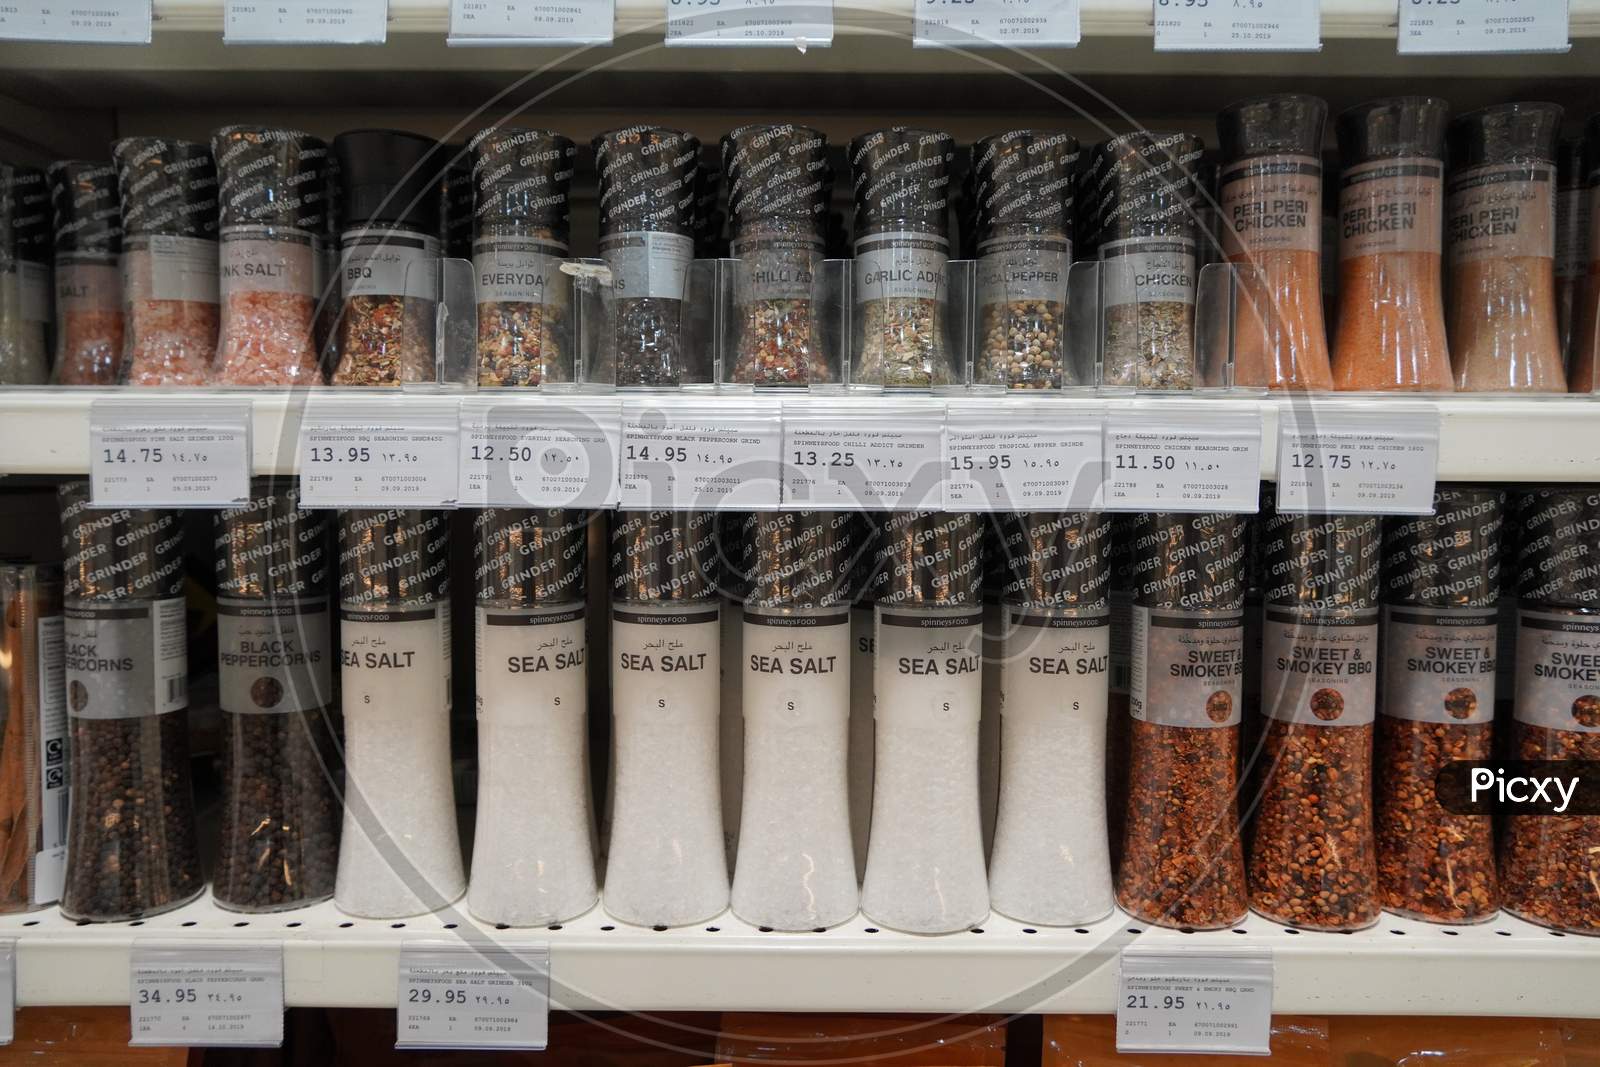 Dubai uae December 2019 Sea salt, pepper, spices, herbs, coriander etc put in shelves for sale. Shelves with herbs, spices and seasonings in a supermarket. Glass jars of spices in a shop.